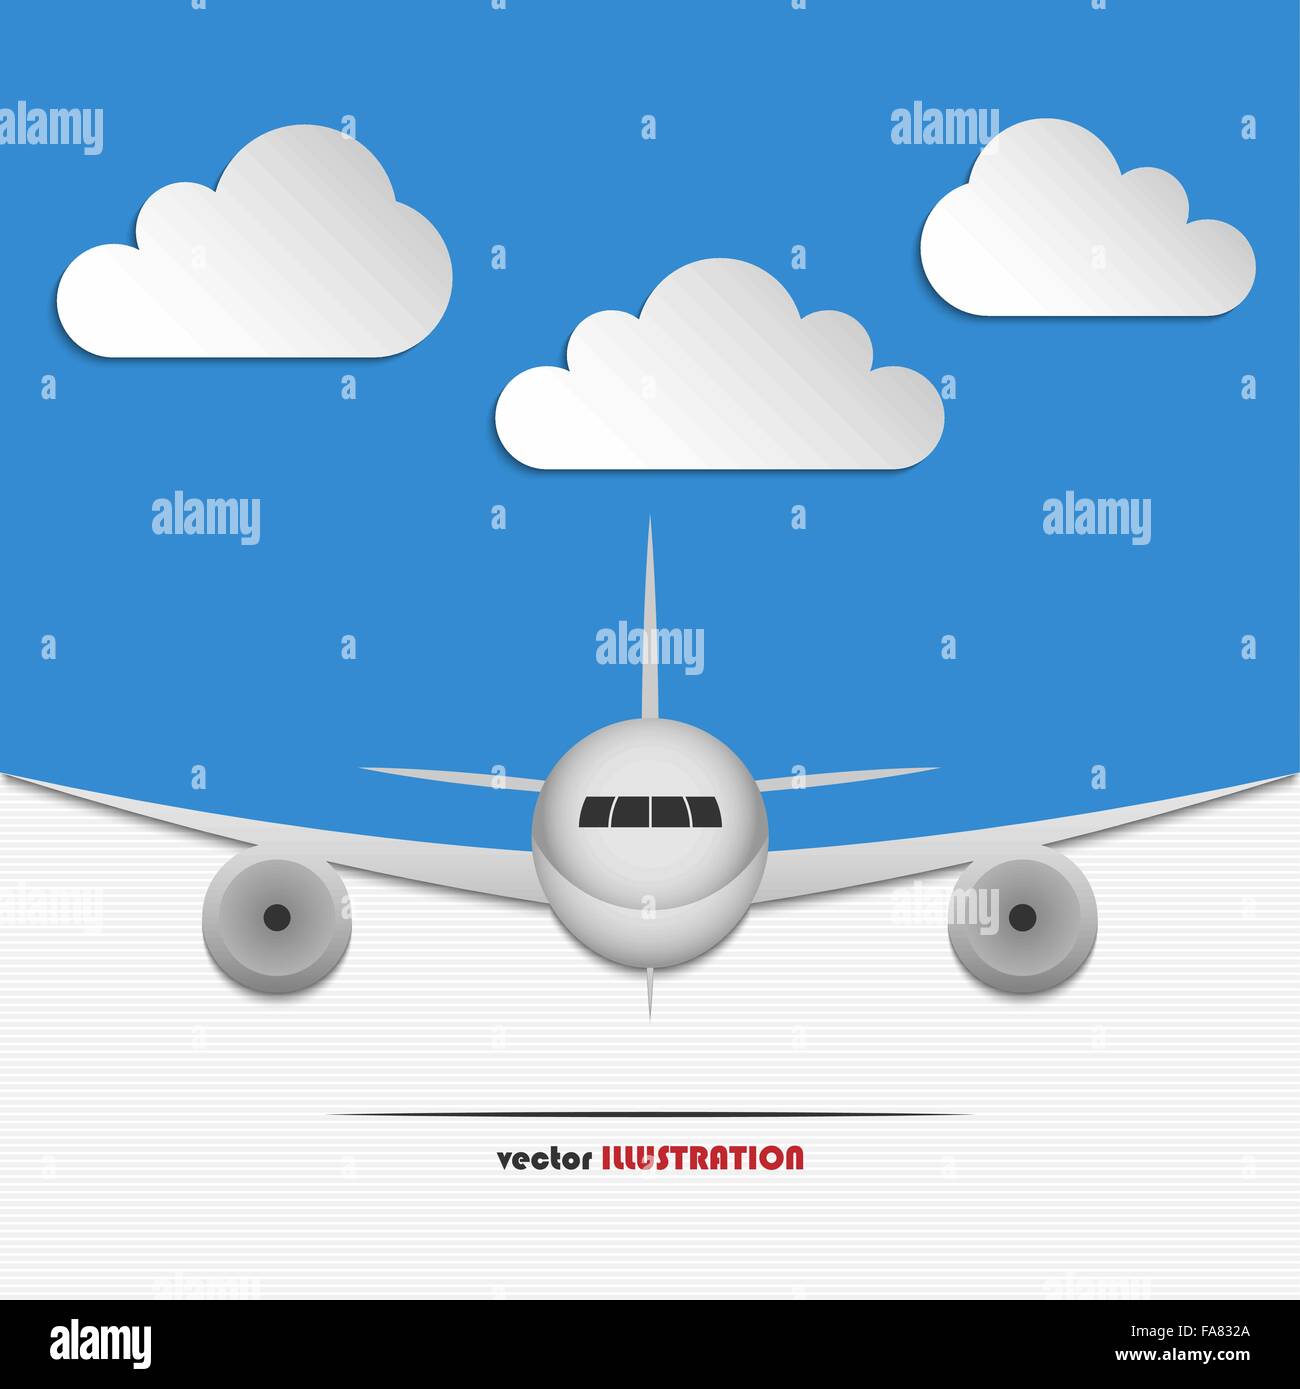 Abstract blue background with clouds and landing airplane for your design Stock Vector